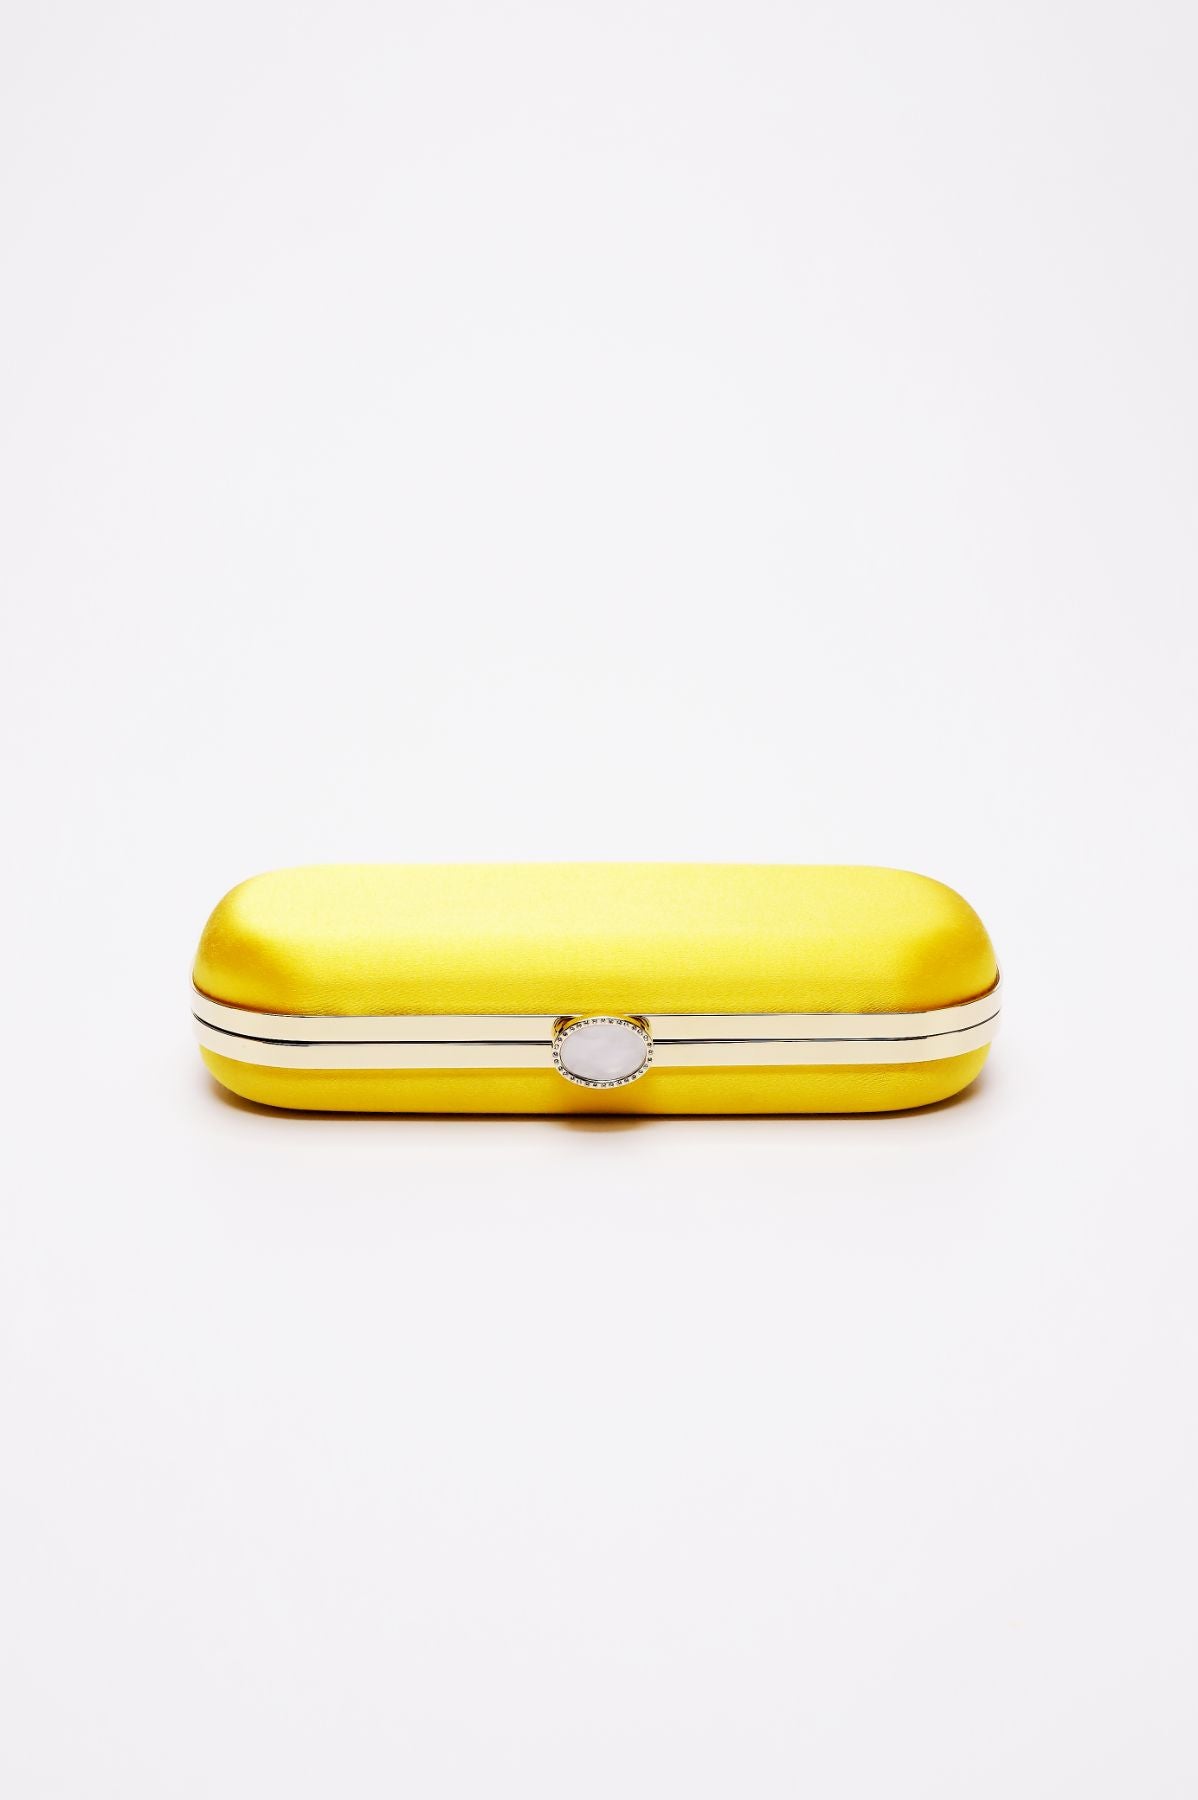 The Bella Rosa Collection Bella Clutch Limoncello Yellow Petite case on a white background.